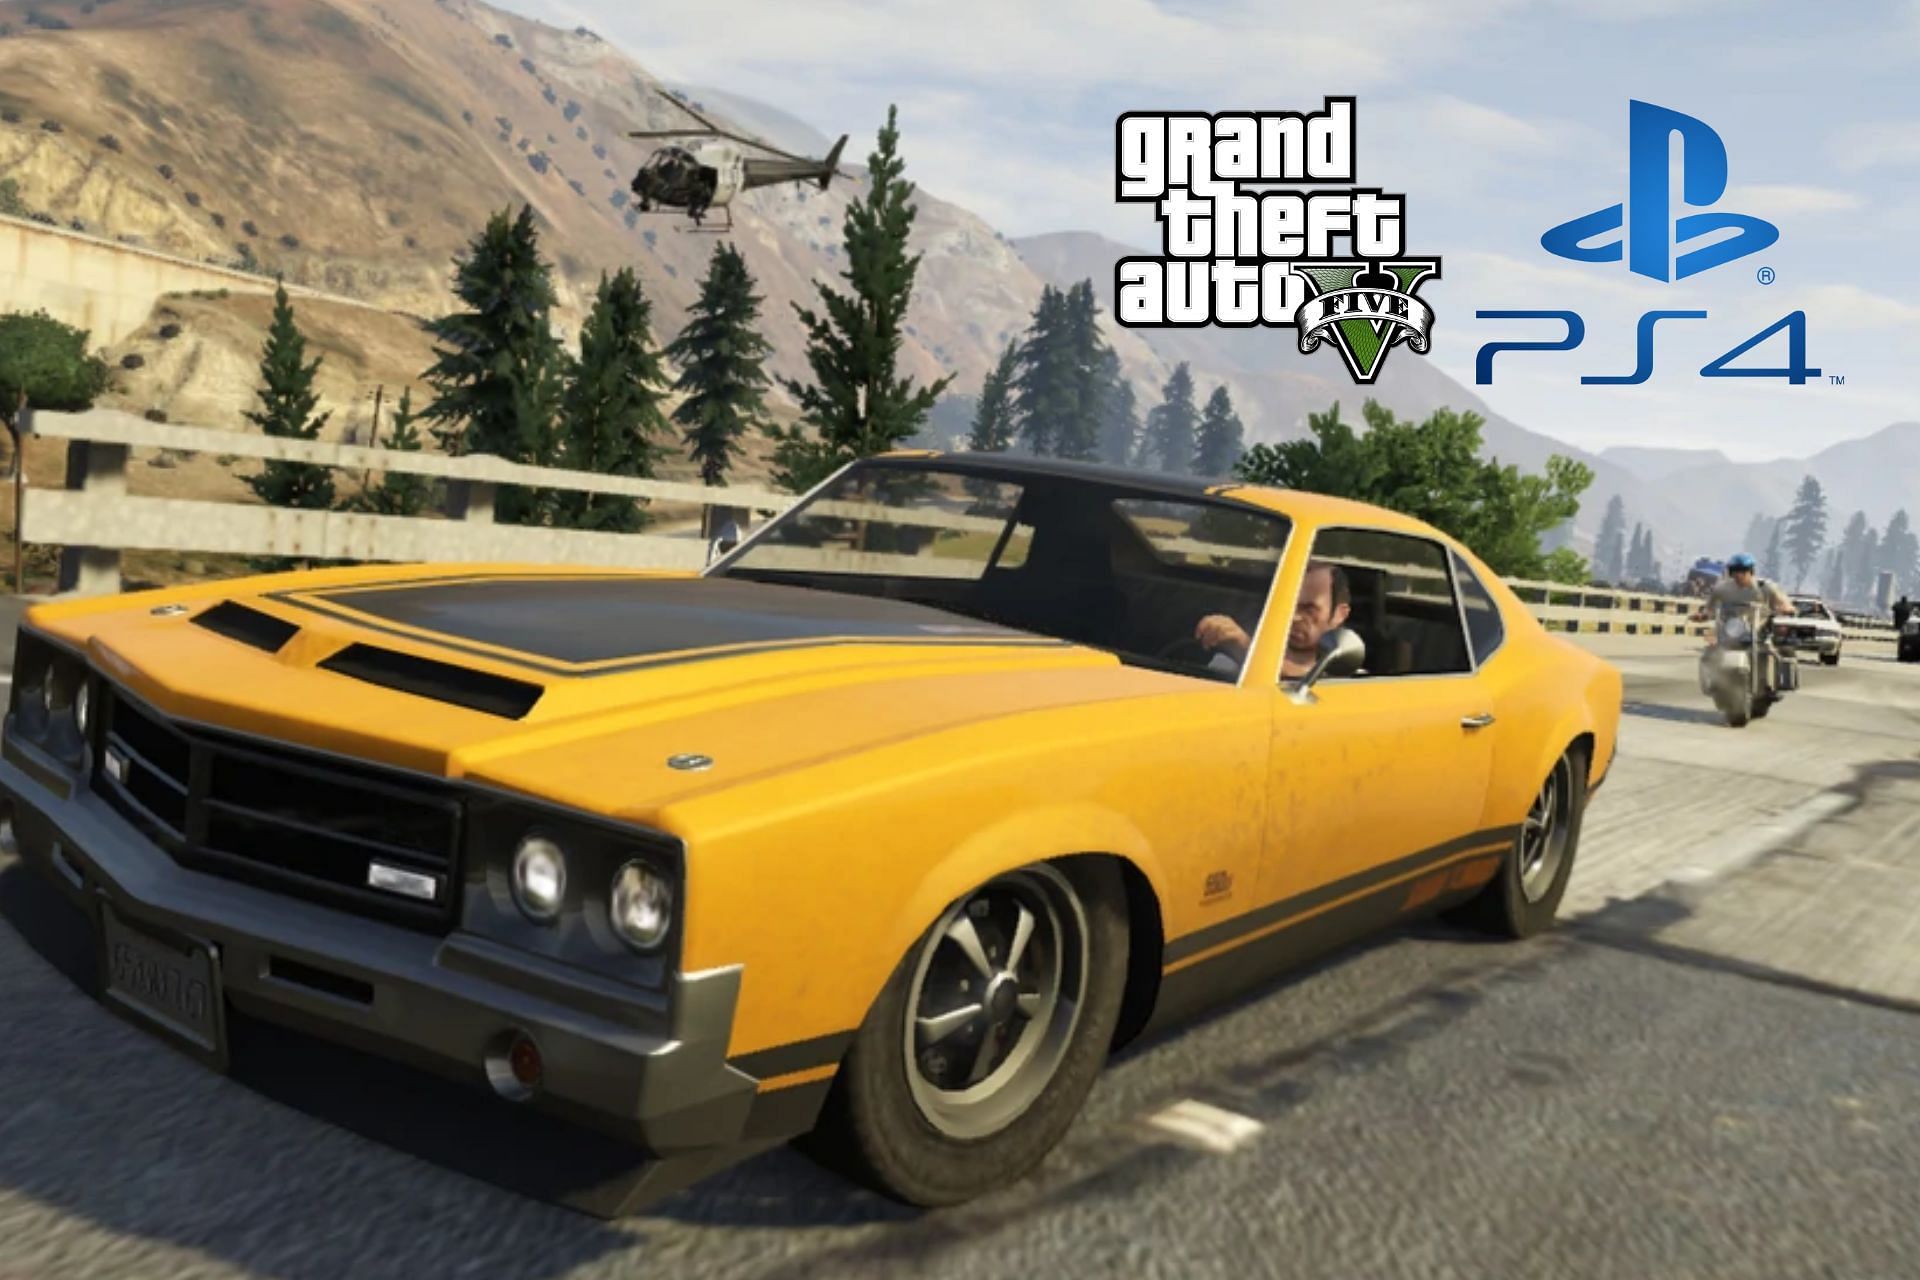 Fact check: Can GTA 5 on PS4 be modded without jailbreak?